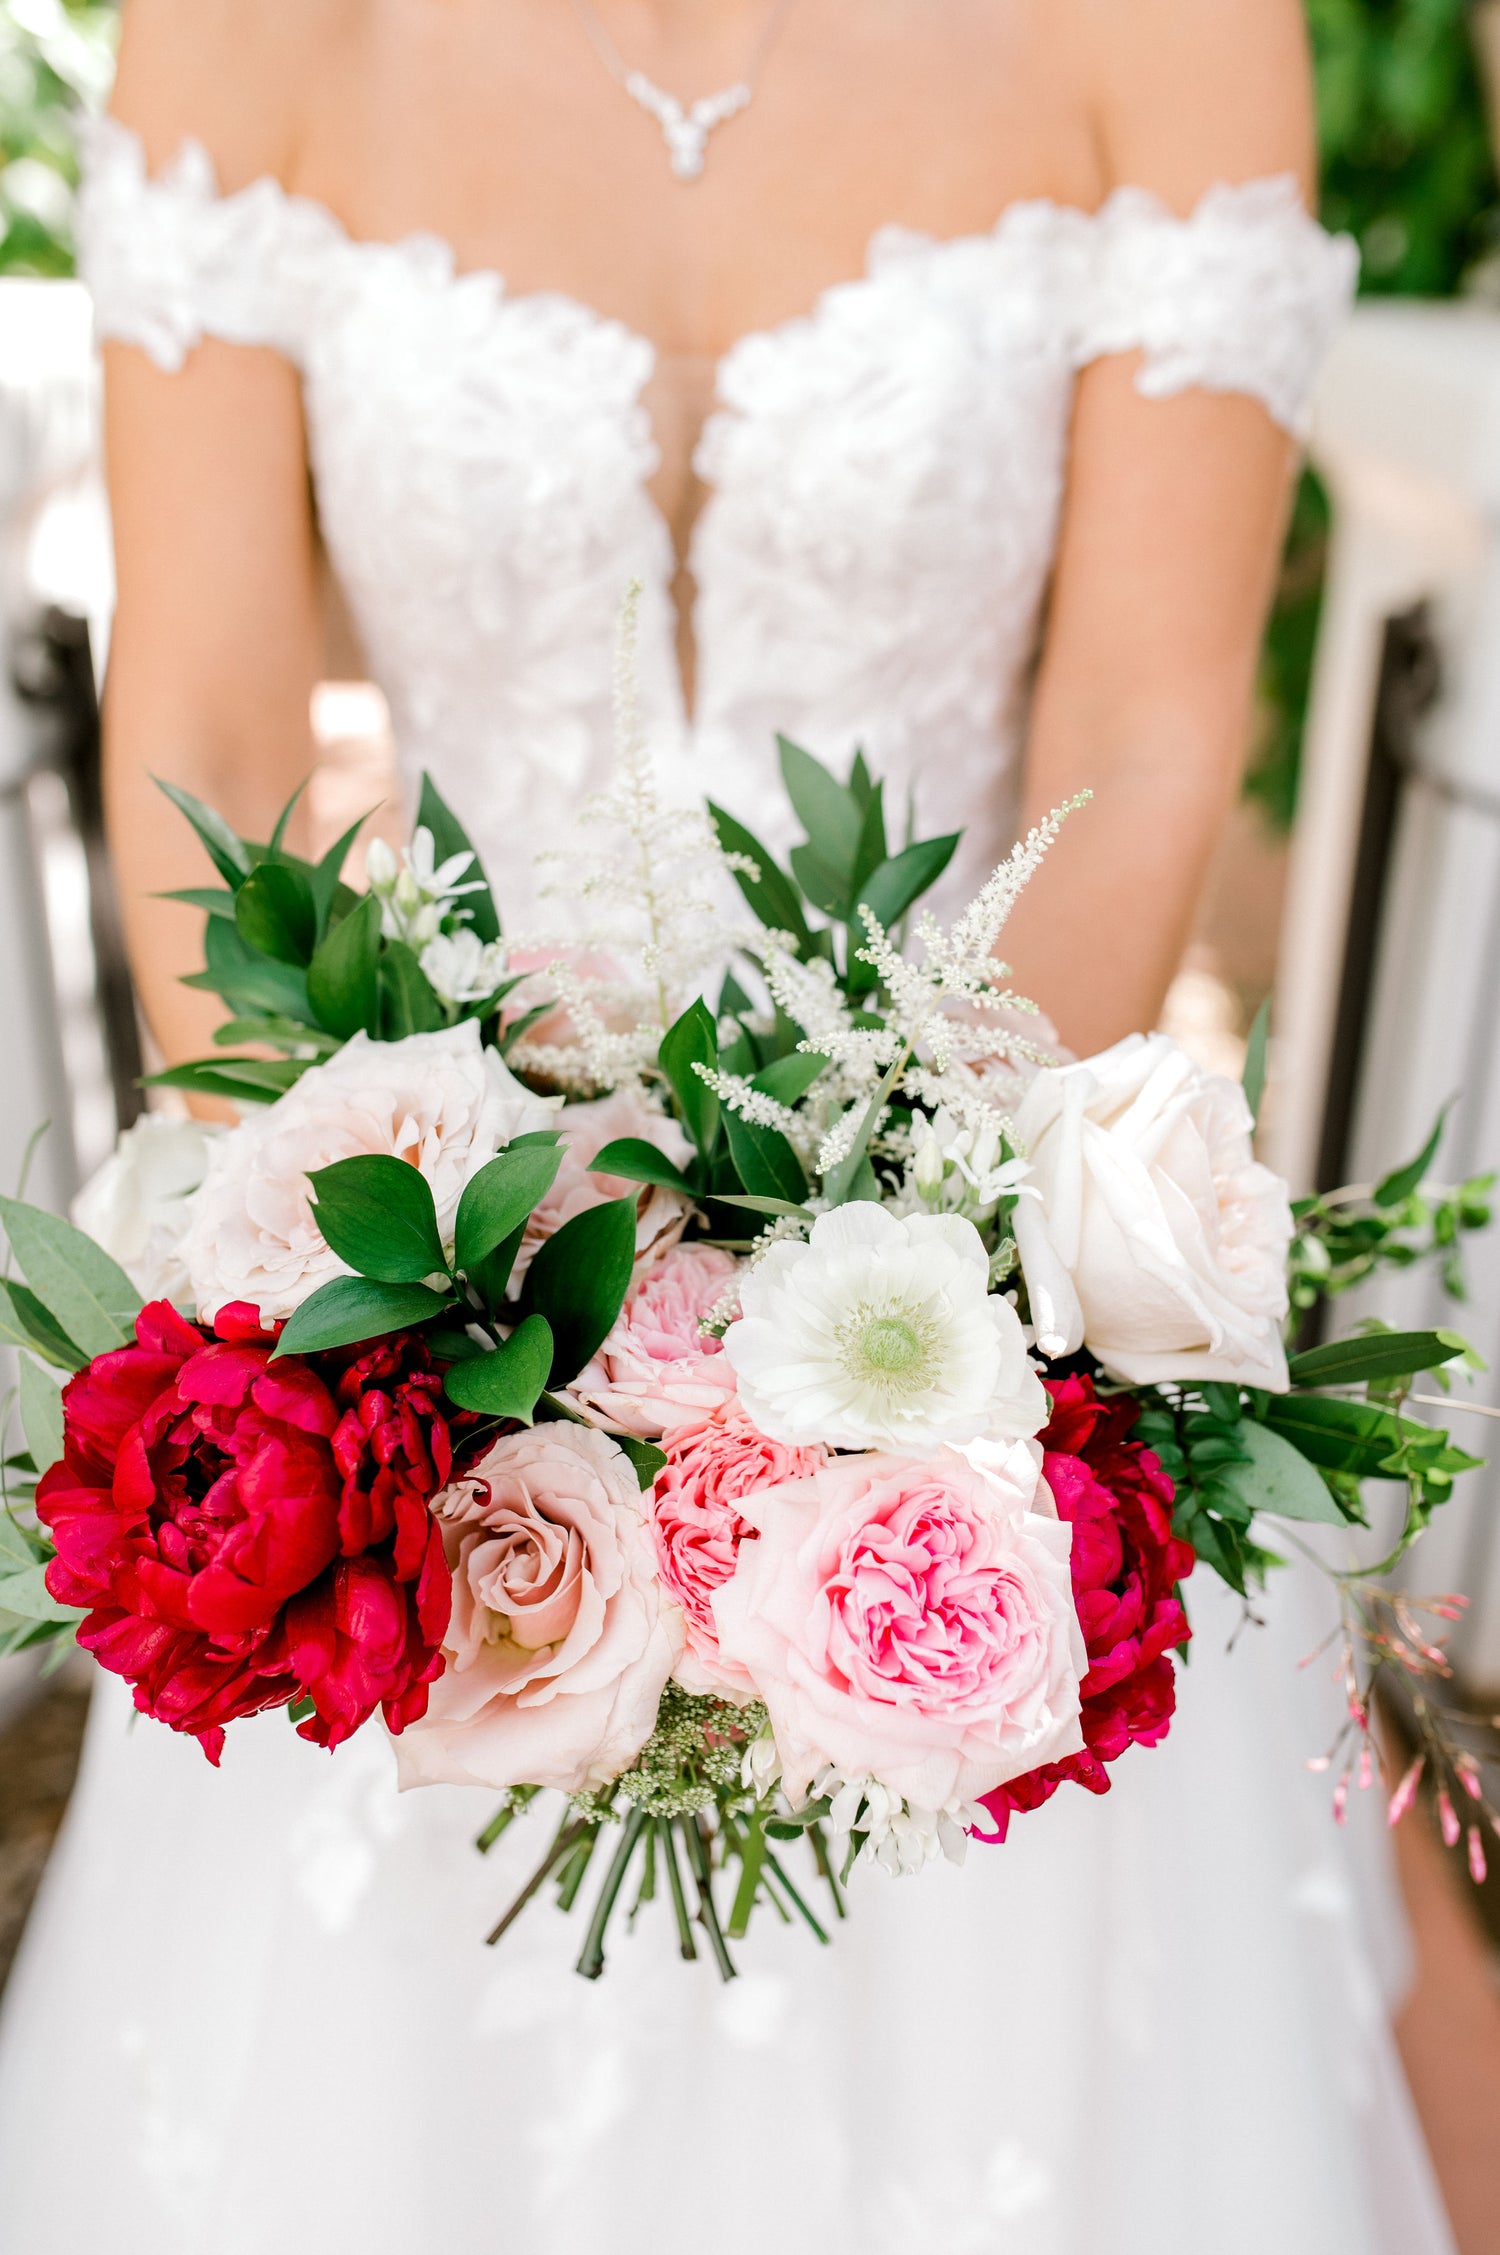 Close up image of bridal bouquet containing garden roses, peonies, anemone, and greenery